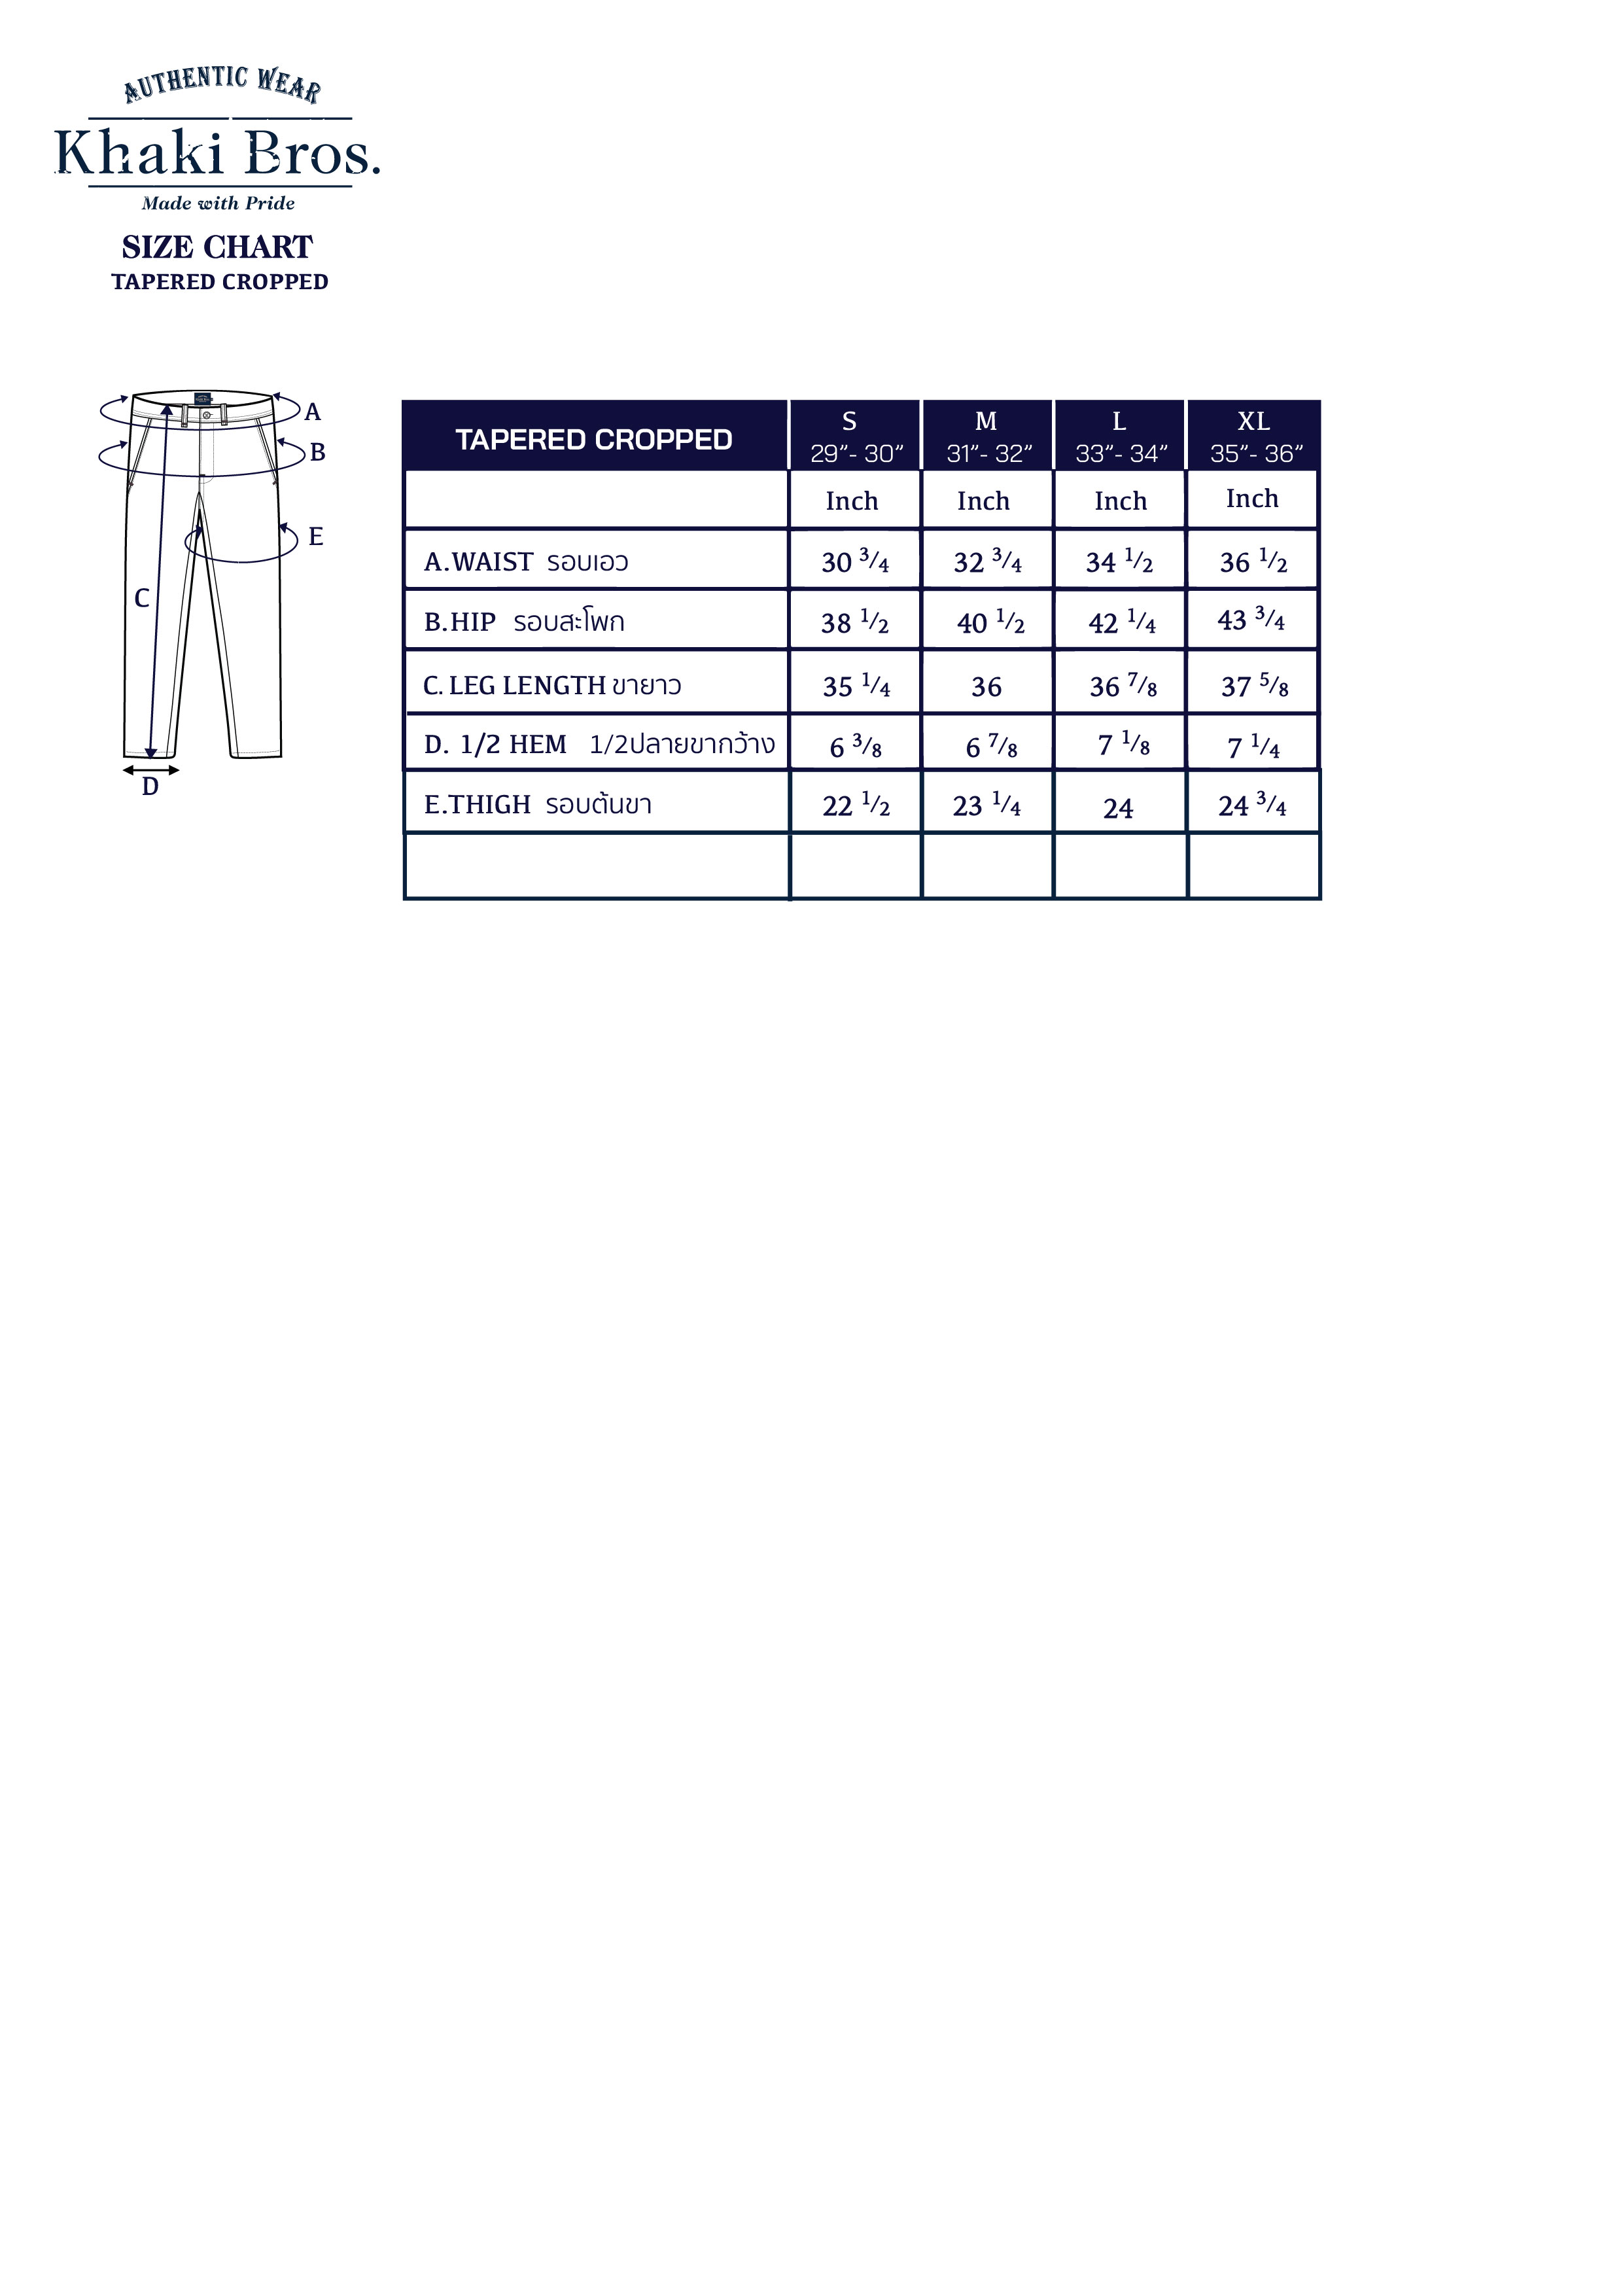 Tapered_Cropped_Size_Chart_2022_Update-27_1_1